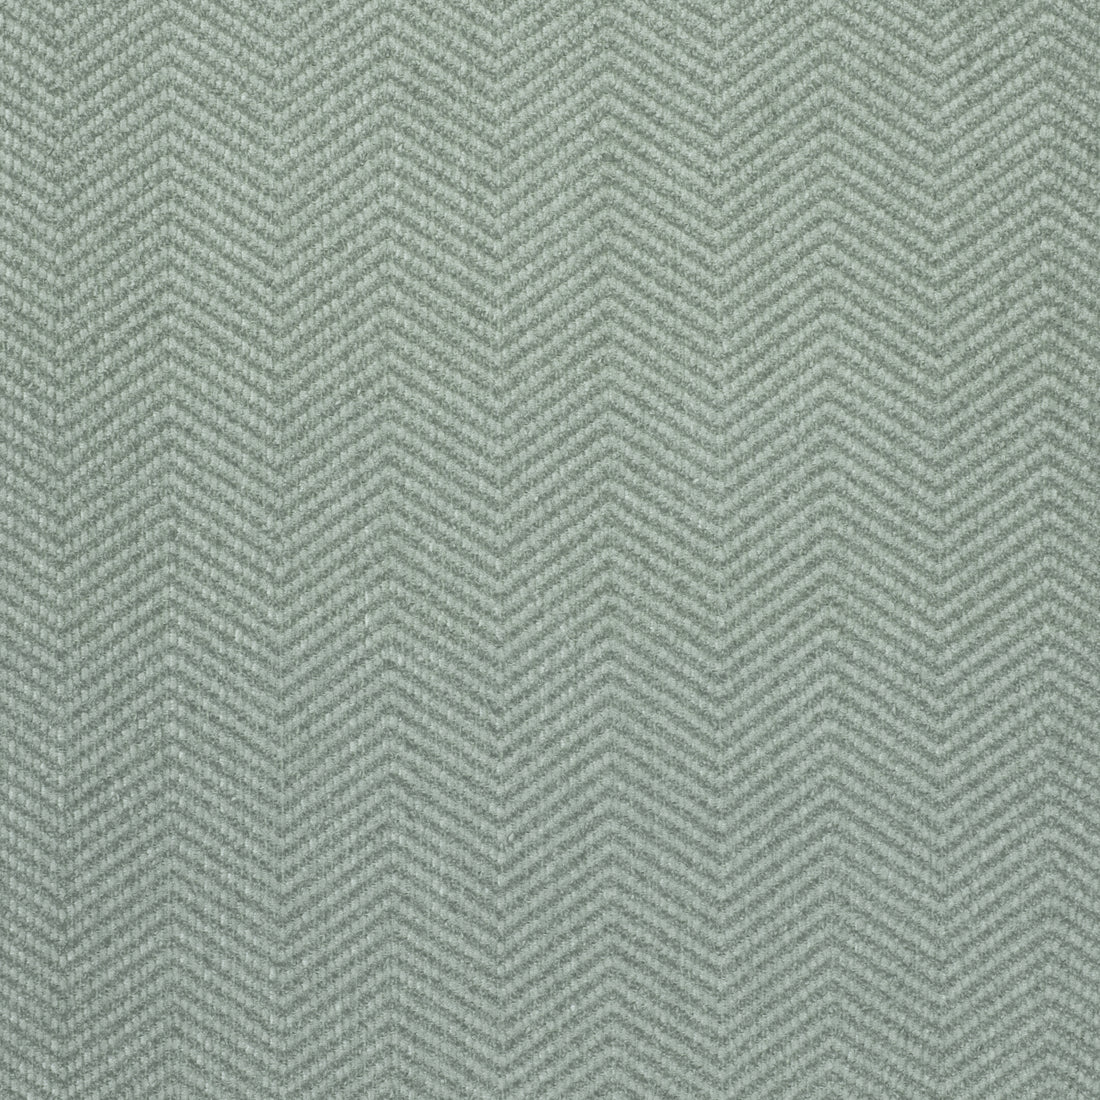 Dalton Herringbone fabric in fog color - pattern number W80622 - by Thibaut in the Pinnacle collection